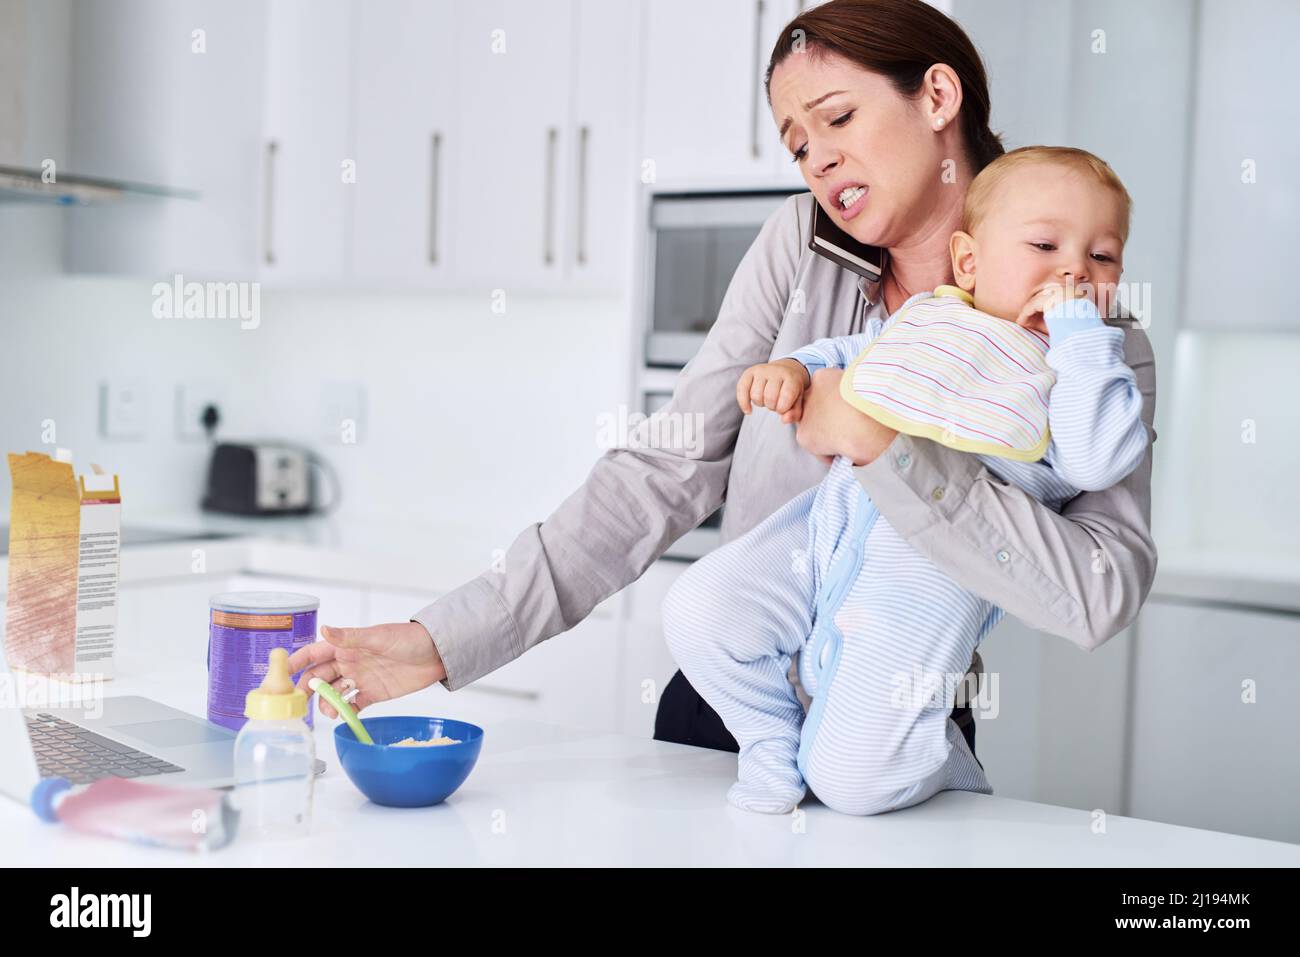 Moments in motherhood. Shot of a mother and her baby boy at home. Stock Photo